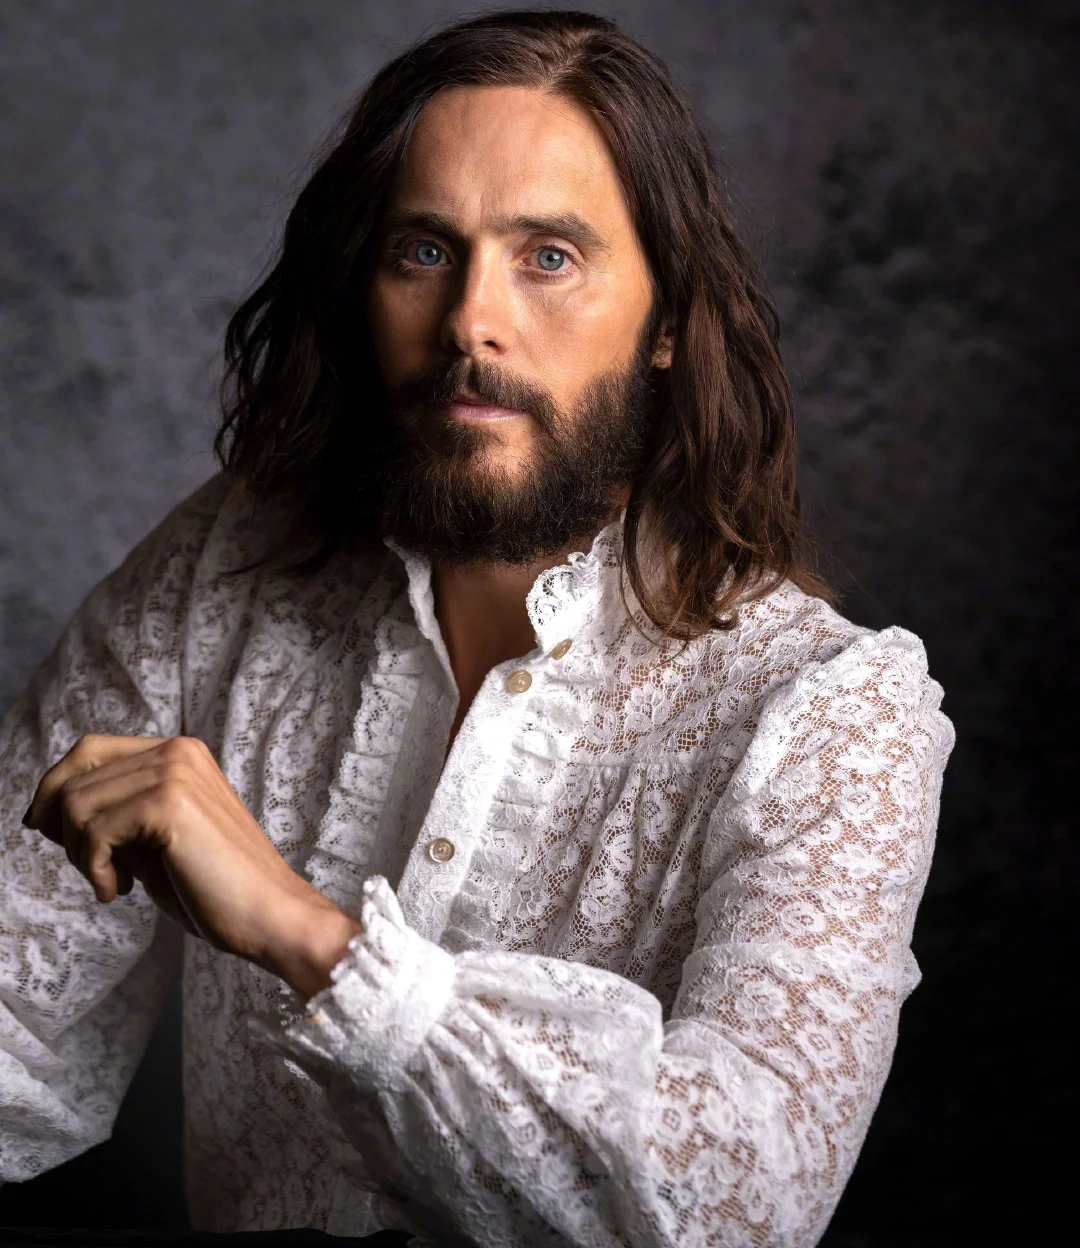 Jared Leto, USA Today's new photo ​​​